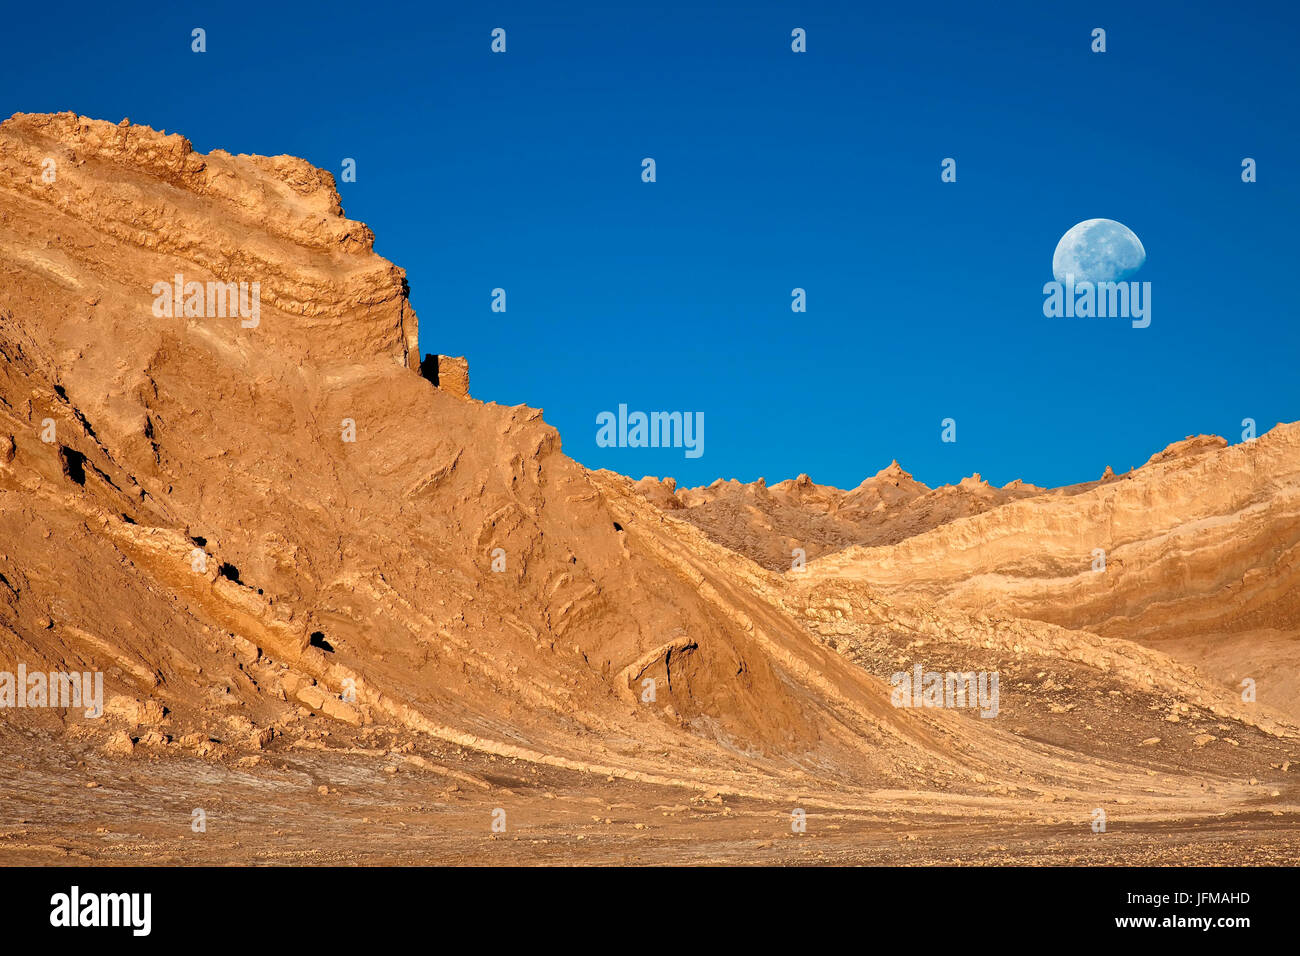 Set of landscapes of incomparable beauty resembling a fragment of the moon landscape in the Moon Valley in San Pedro de Atacama, Chile, This wonderful natural phenomenon is due to the encounter of the Atacama desert with the Andes mountain range, South America Stock Photo